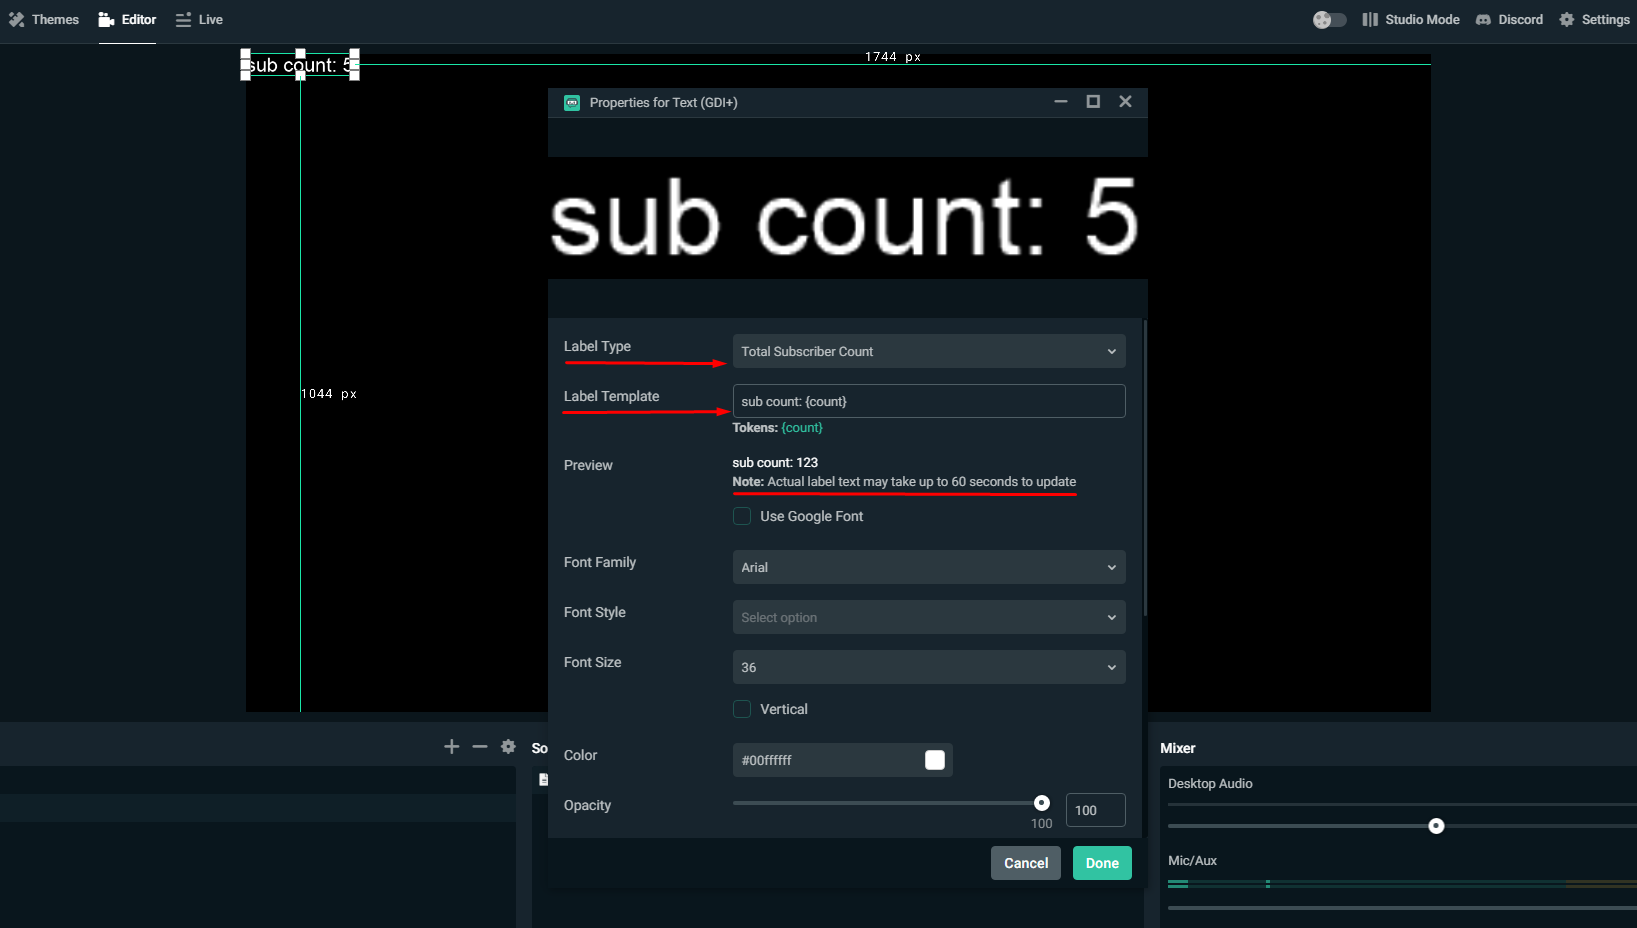 what is streamlabs obs